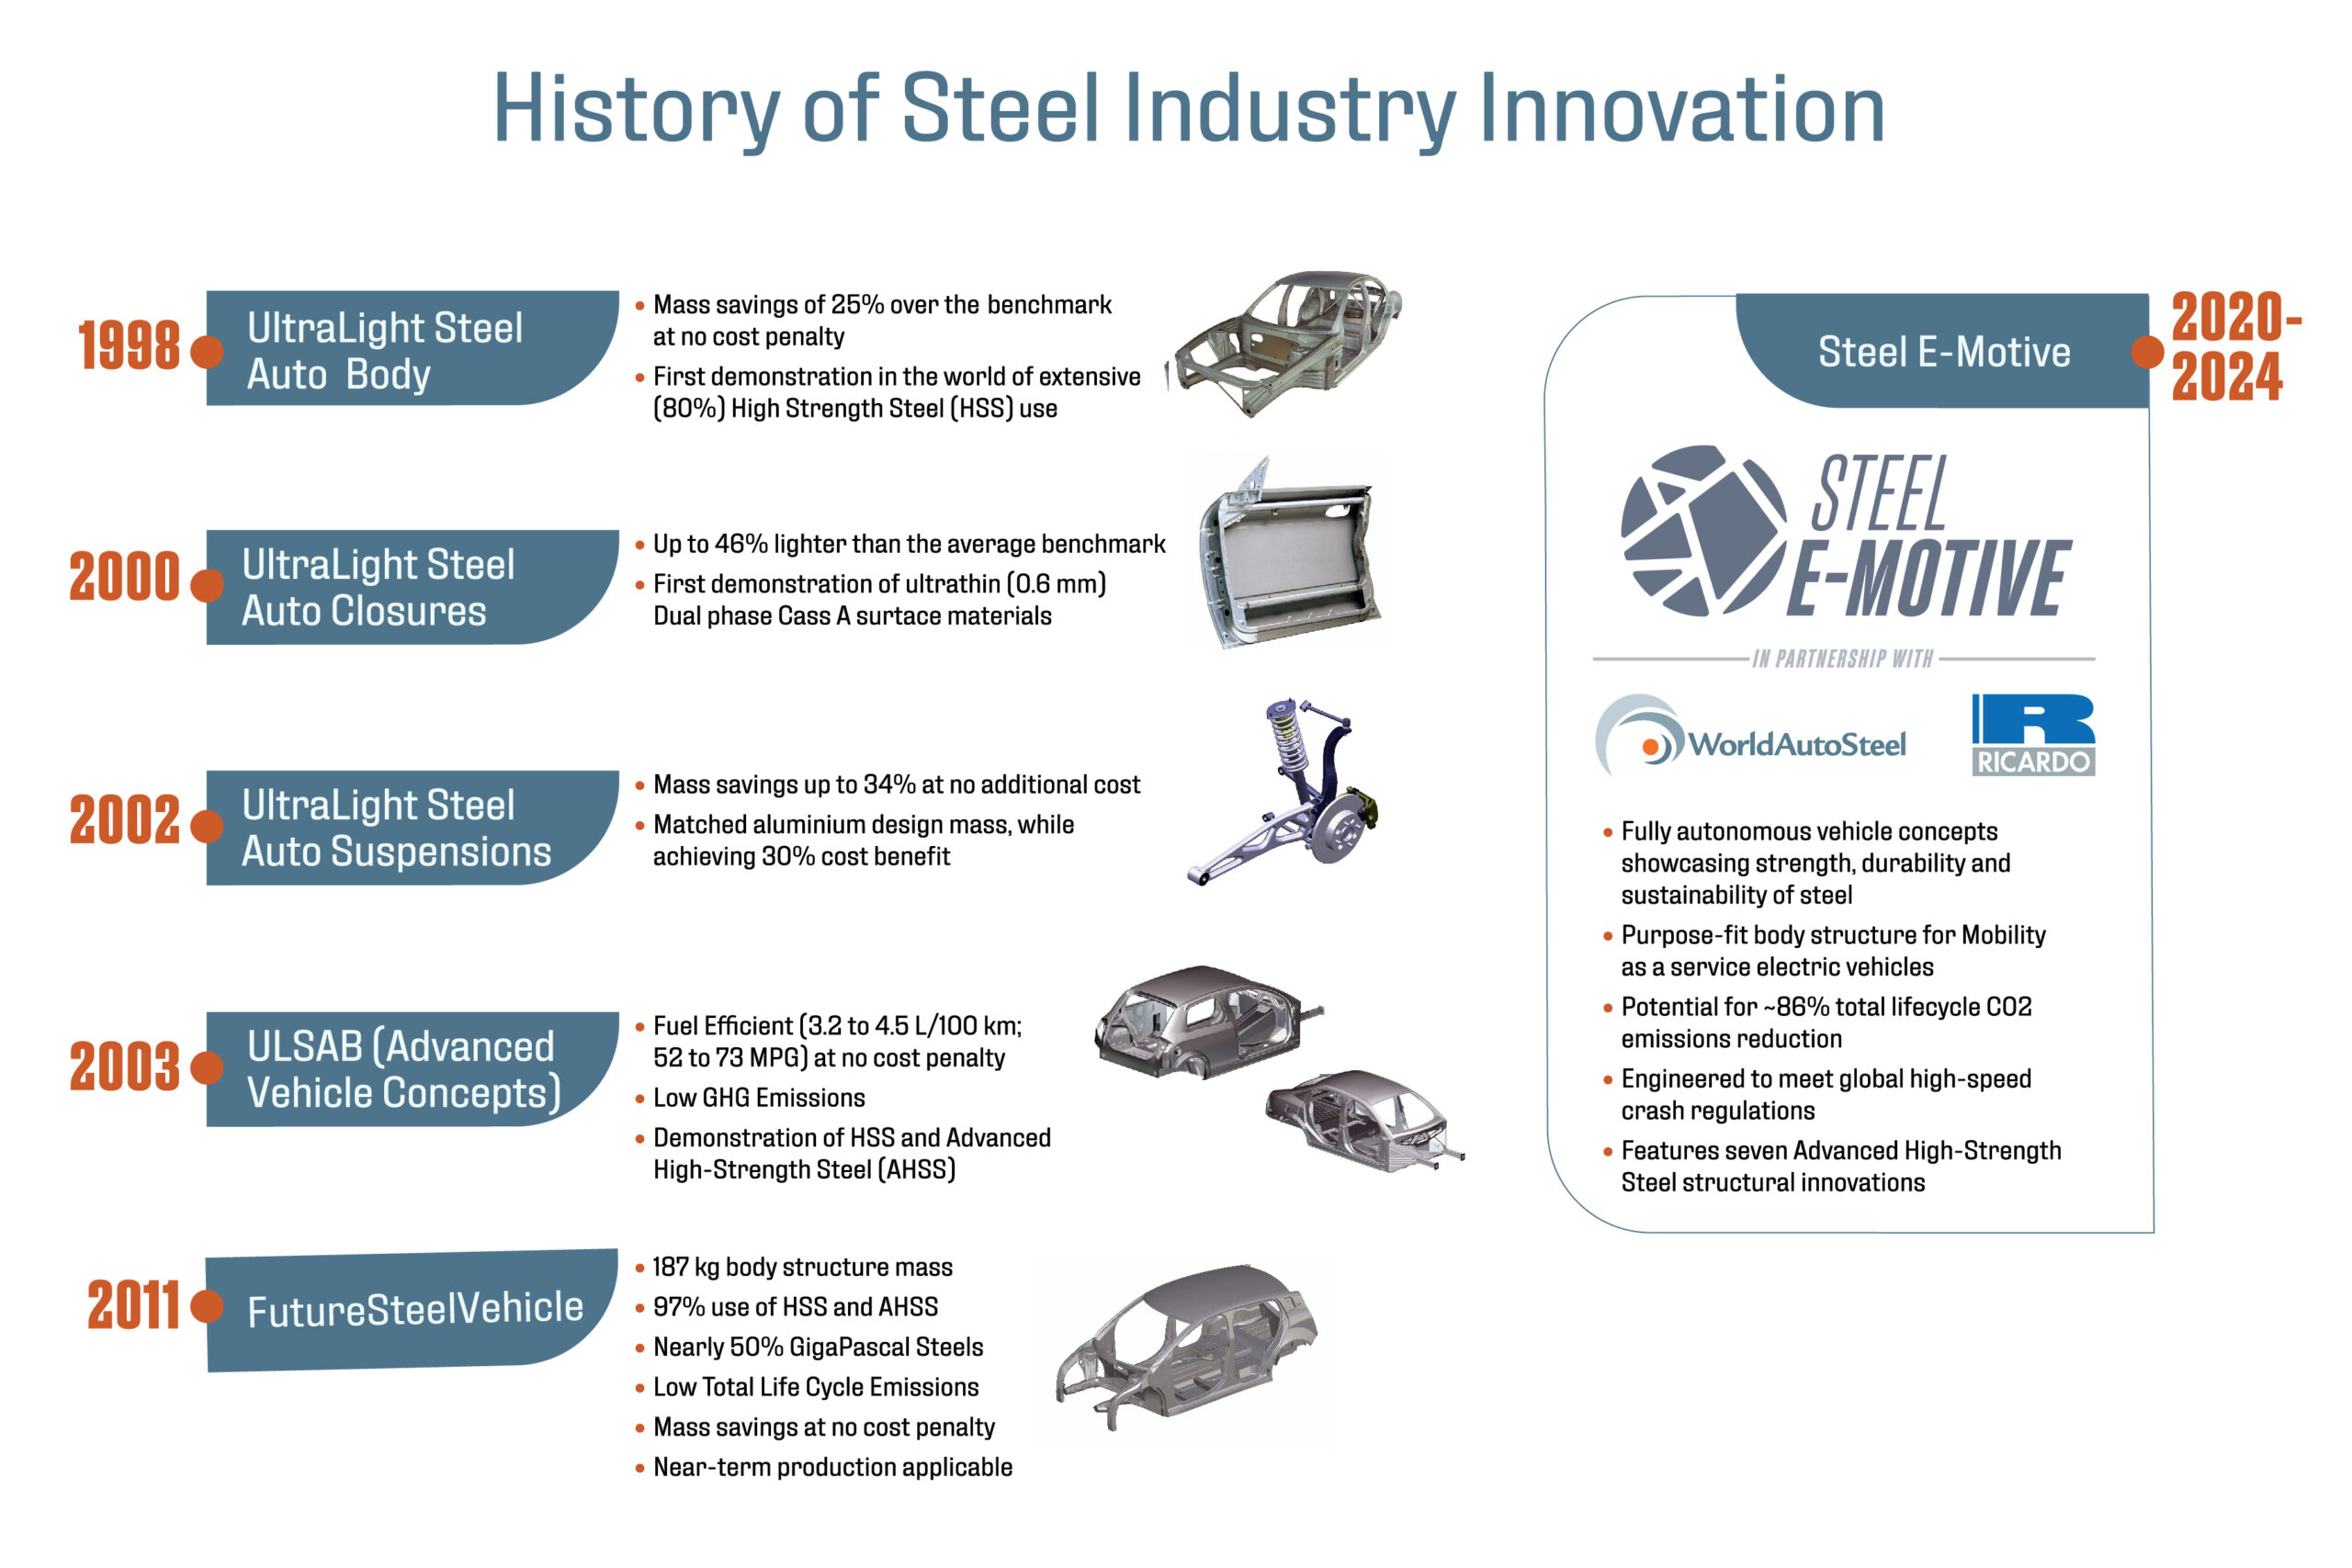 STEEL E-MOTIVE IS THE LATEST IN A 26-YEAR HISTORY OF INNOVATIVE AUTOMOTIVE STEEL PROGRAMS